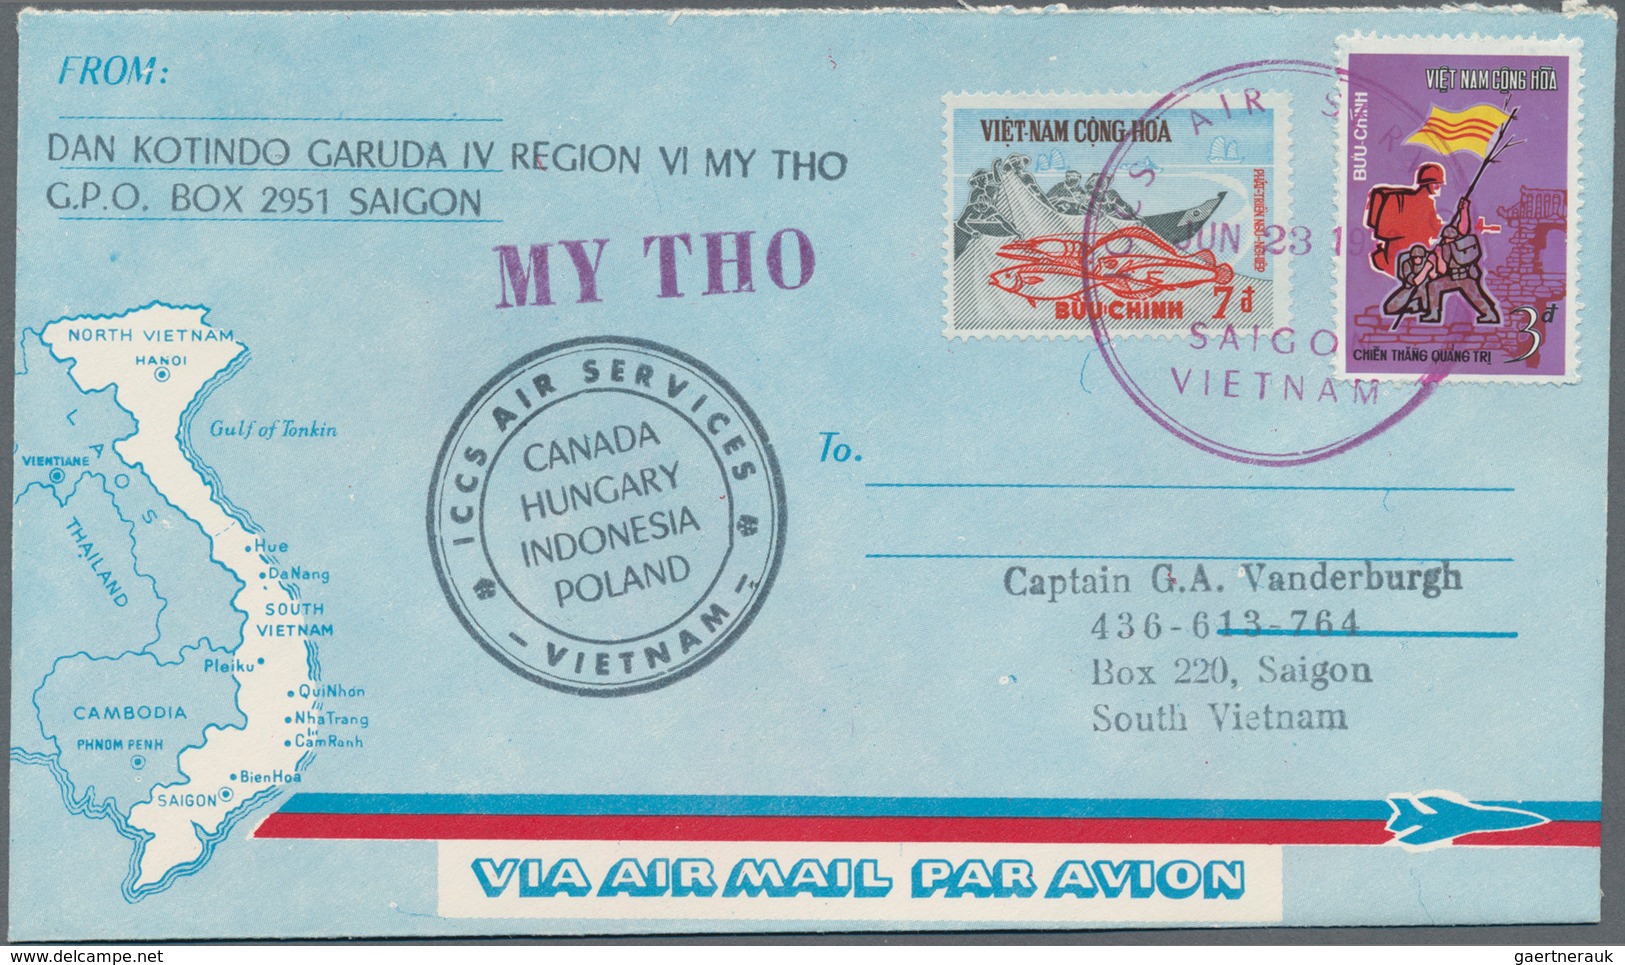 Vietnam: 1952/96, 32 covers and 6 labels of South Vietnam, as well as covers after unification, some